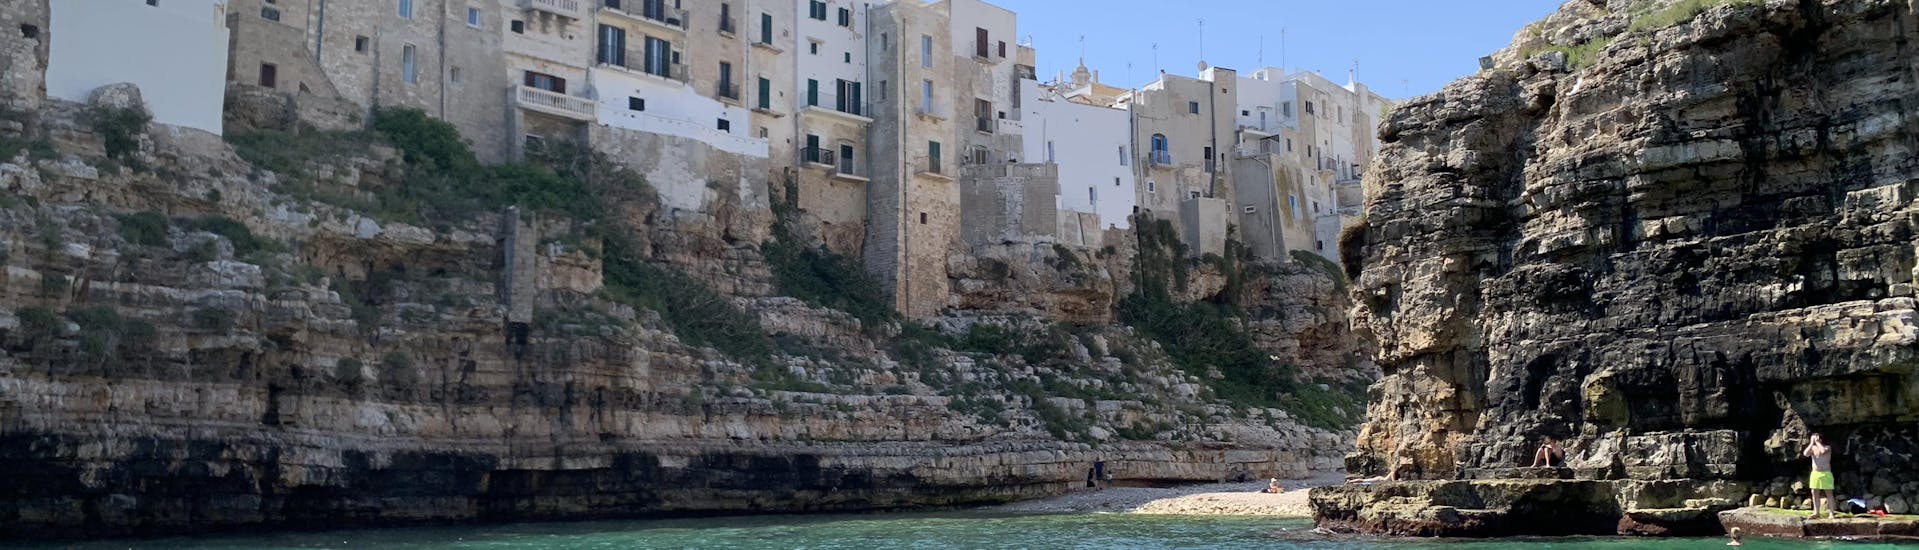 View of the cliffs of Polignano a Mare during the Sailing Boat Trip to the Polignano Caves from Monopoli with Pugliamare.